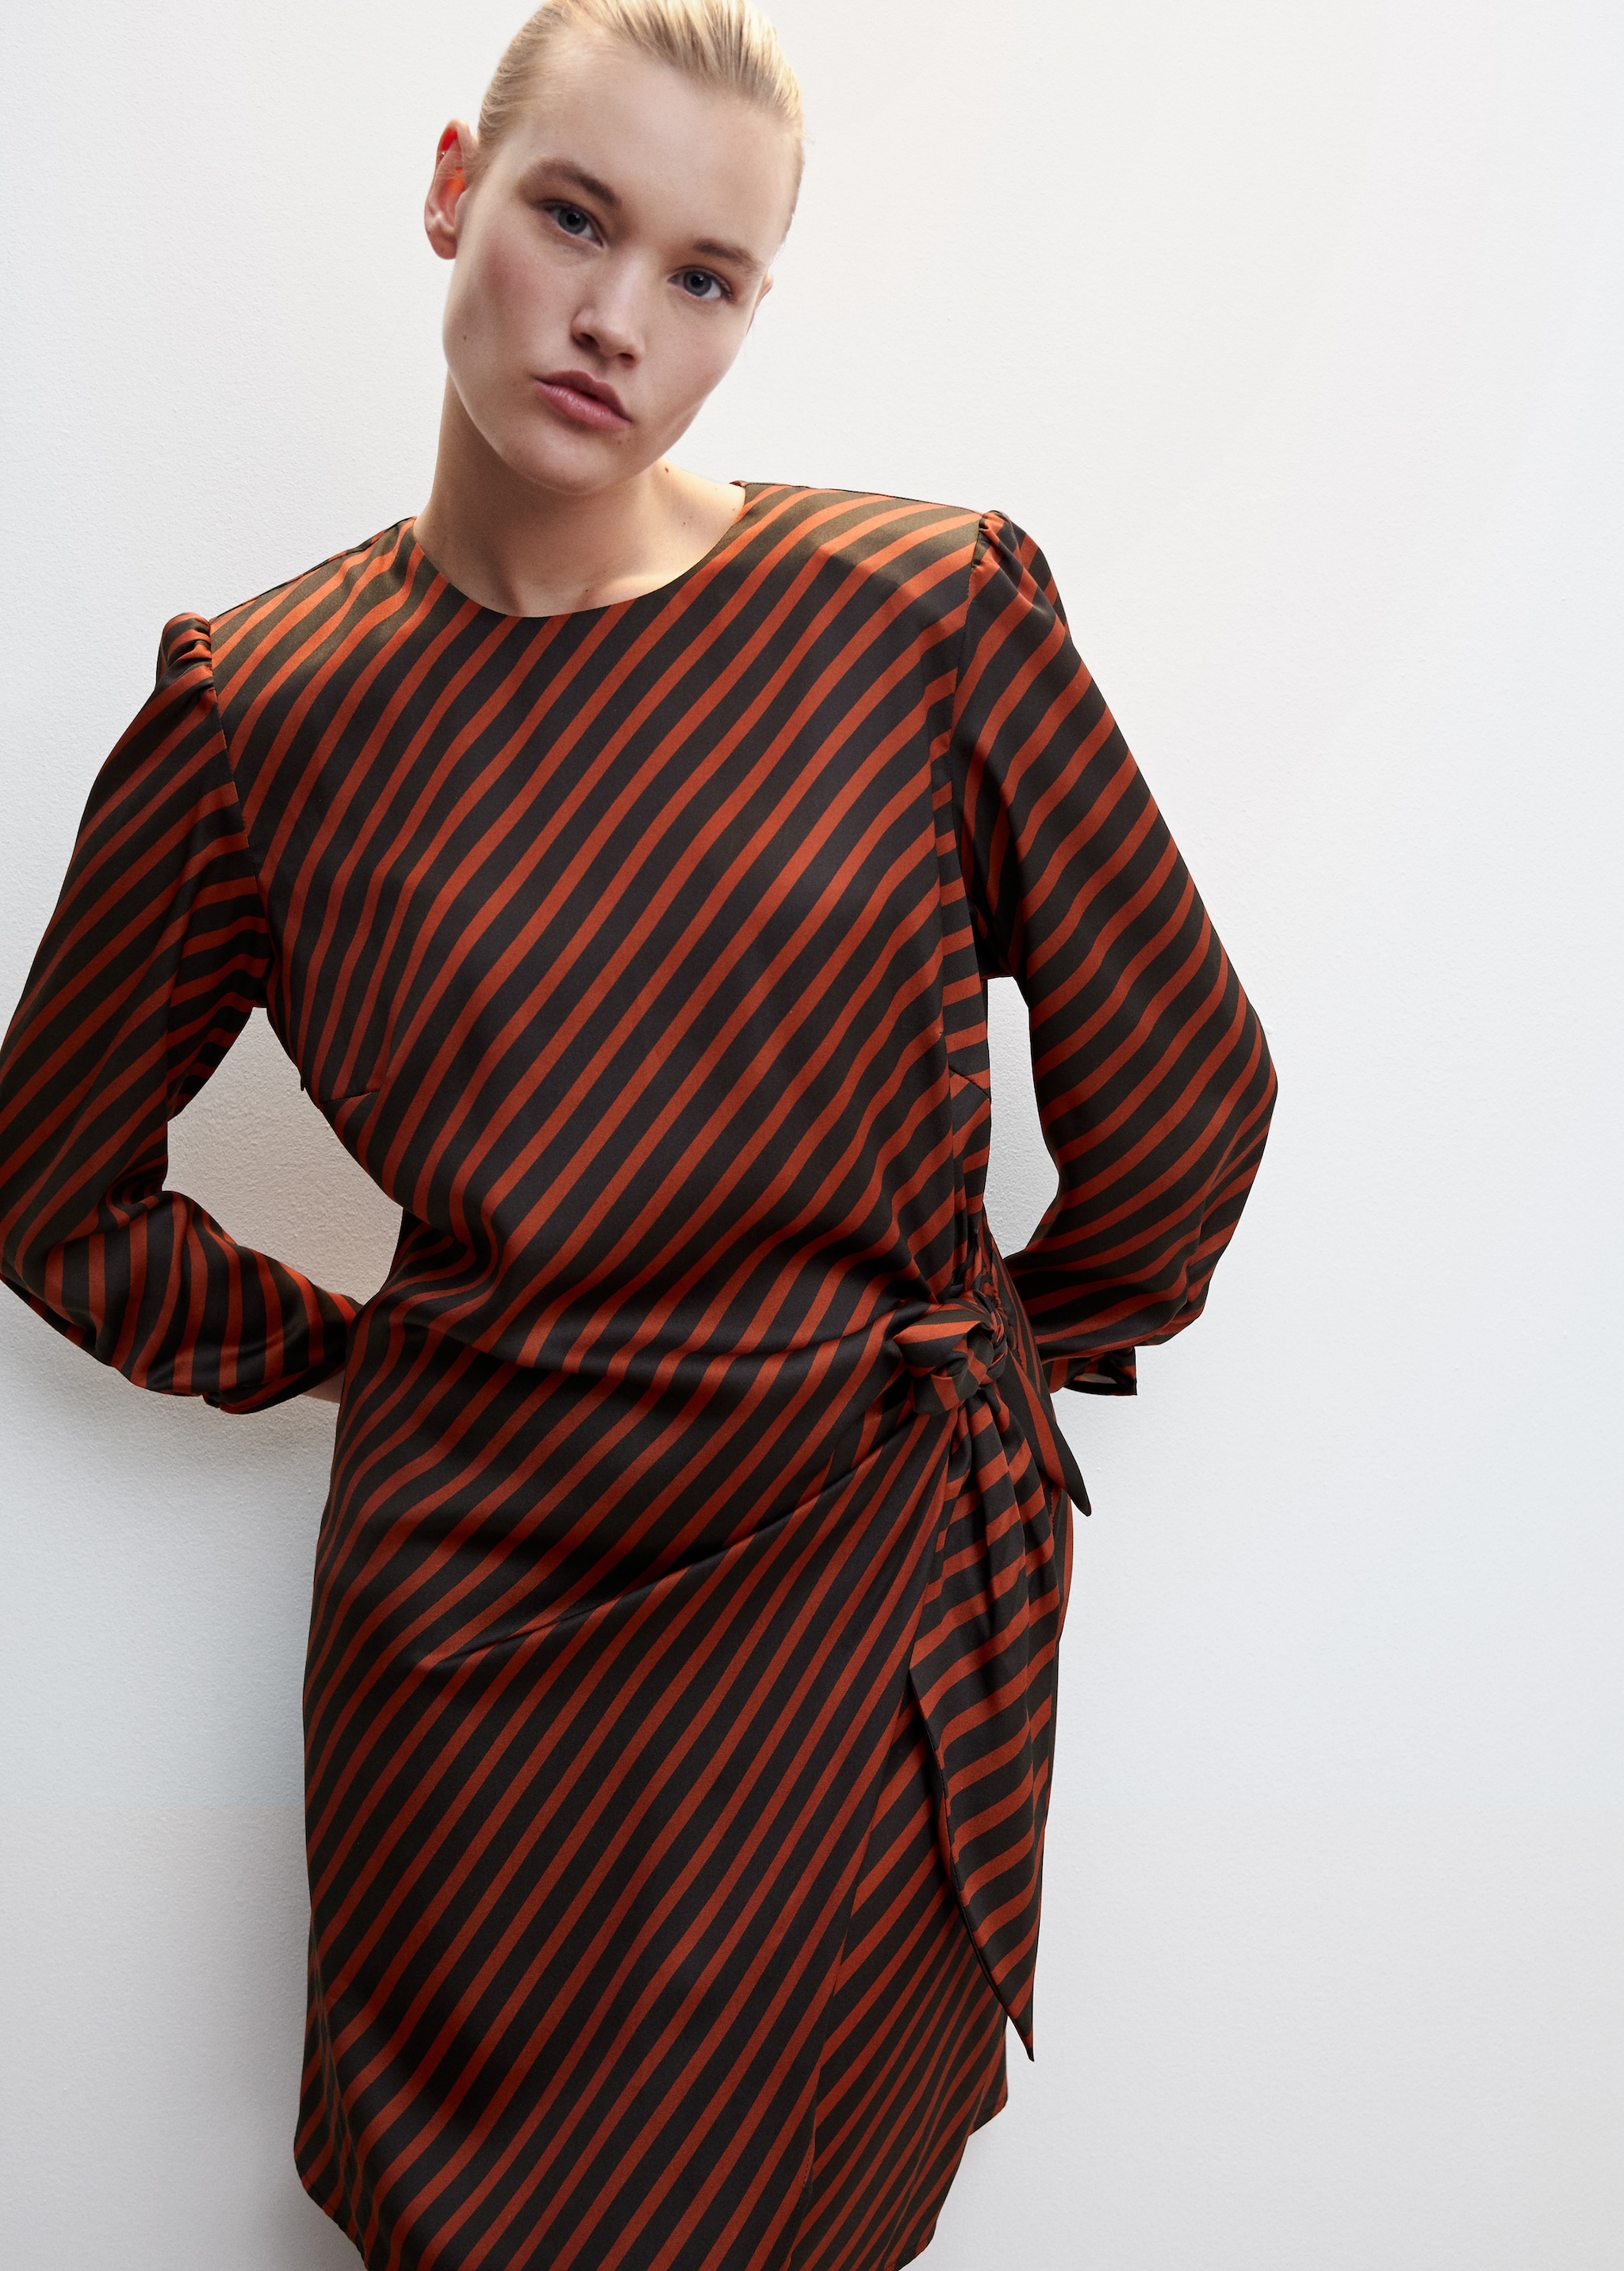 Knot striped dress - Details of the article 5